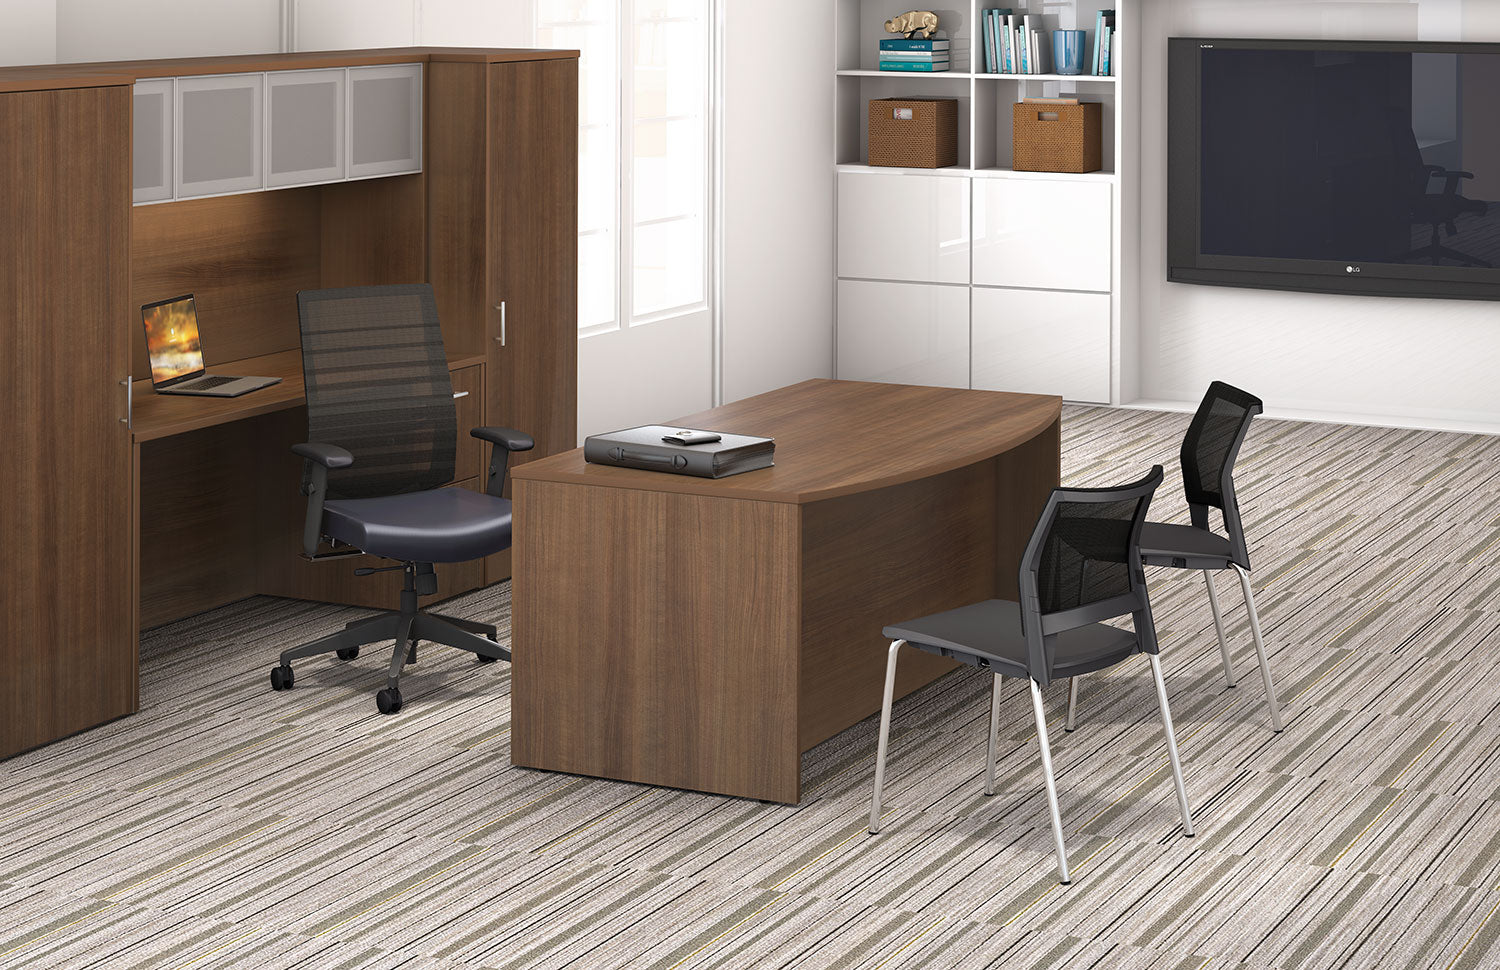 HPFI Roomset Full Office including chairs